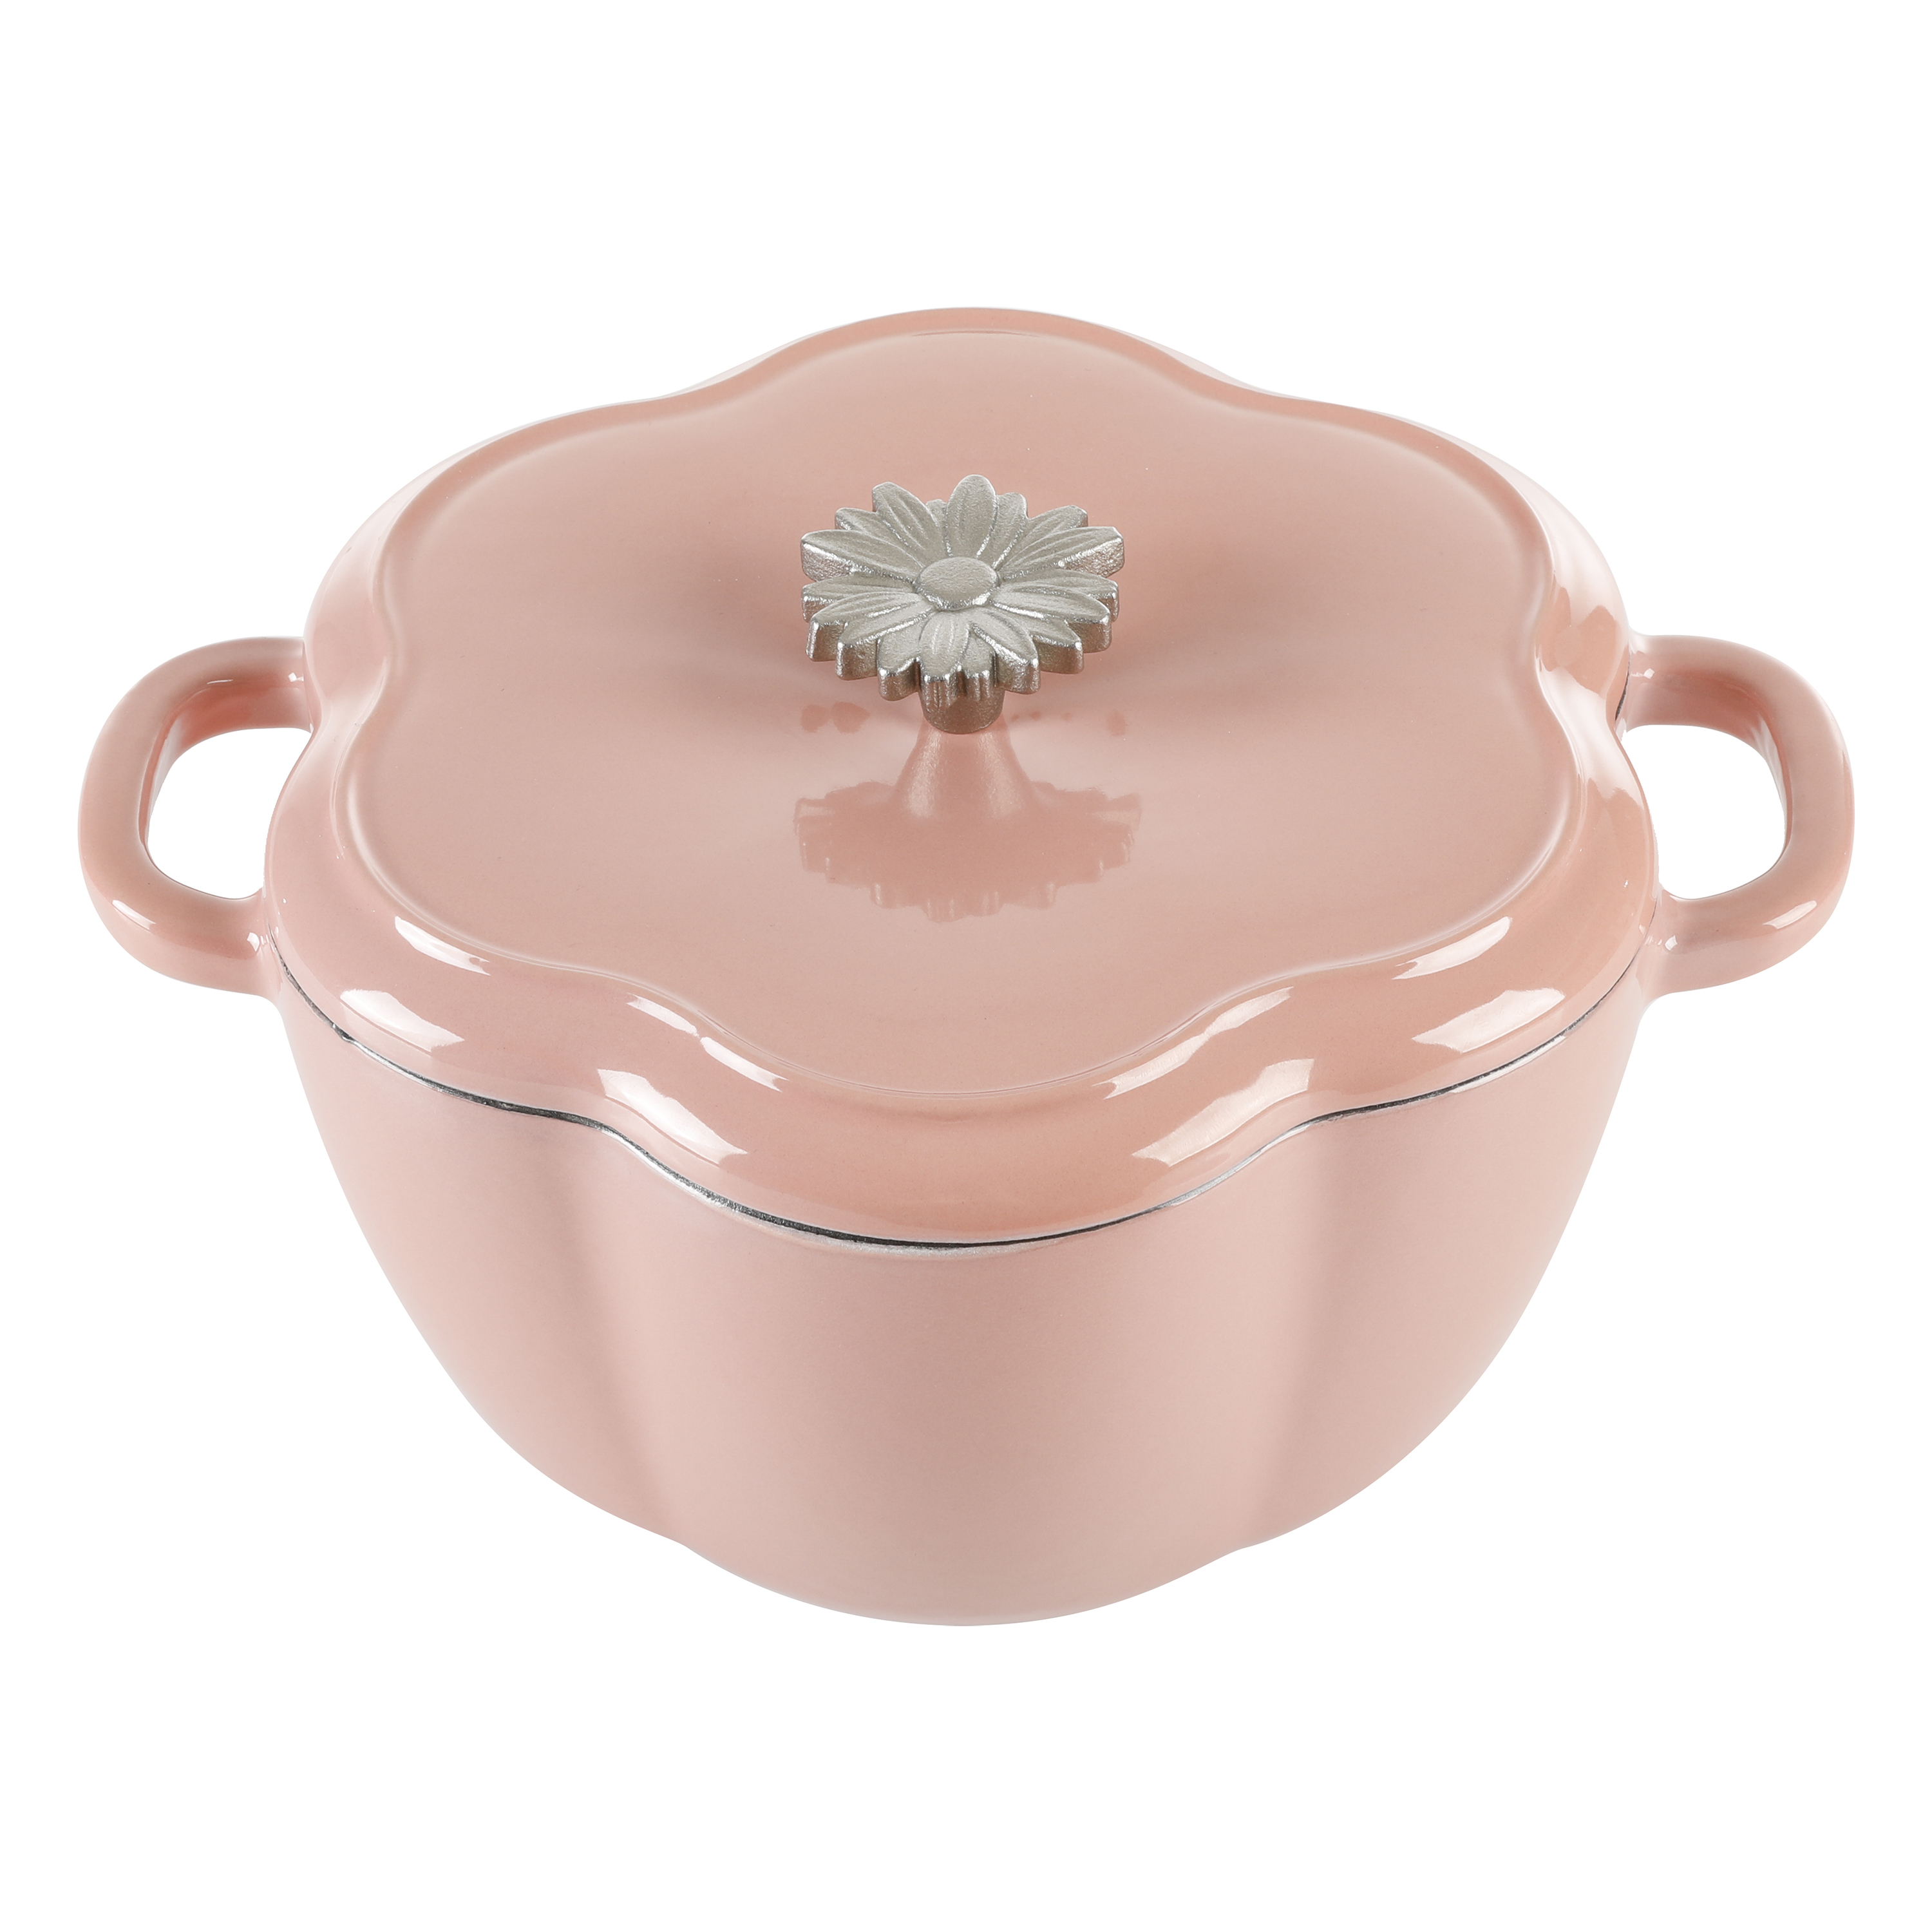 The Pioneer Woman Timeless Beauty Enamel on Cast Iron 3-Quart Dutch Oven, Pink - image 3 of 9